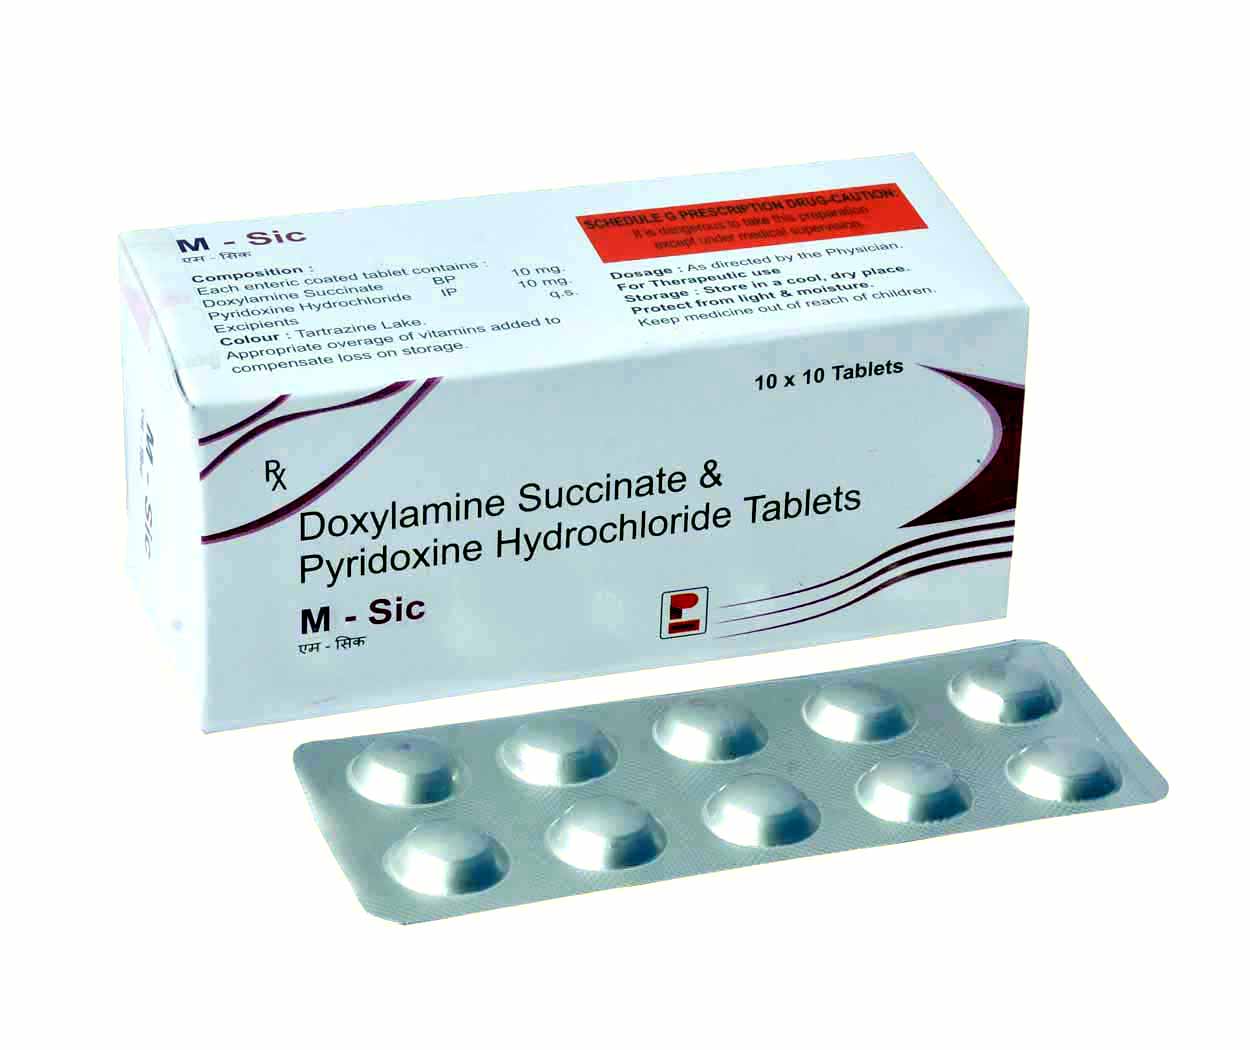 Product Name: M Sic, Compositions of M Sic are Doxylamine Succinate Pyridoxine Hydrochloride Tablets - Park Pharmaceuticals